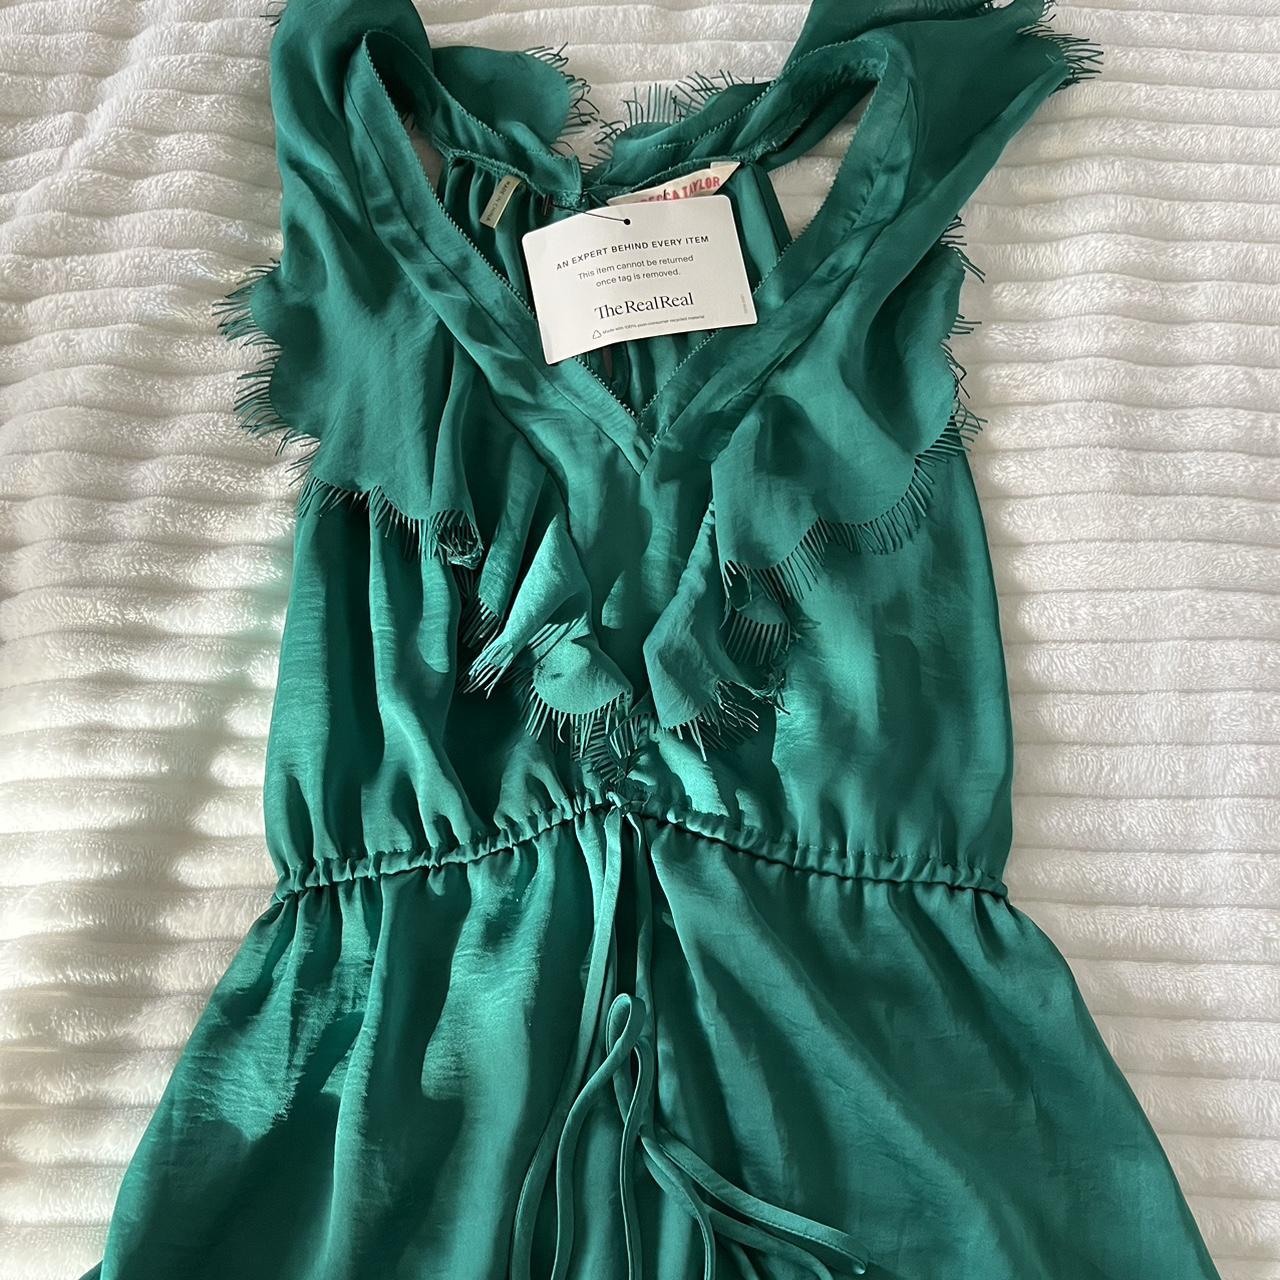 Brand new Rebecca Taylor green top! From The Real... - Depop